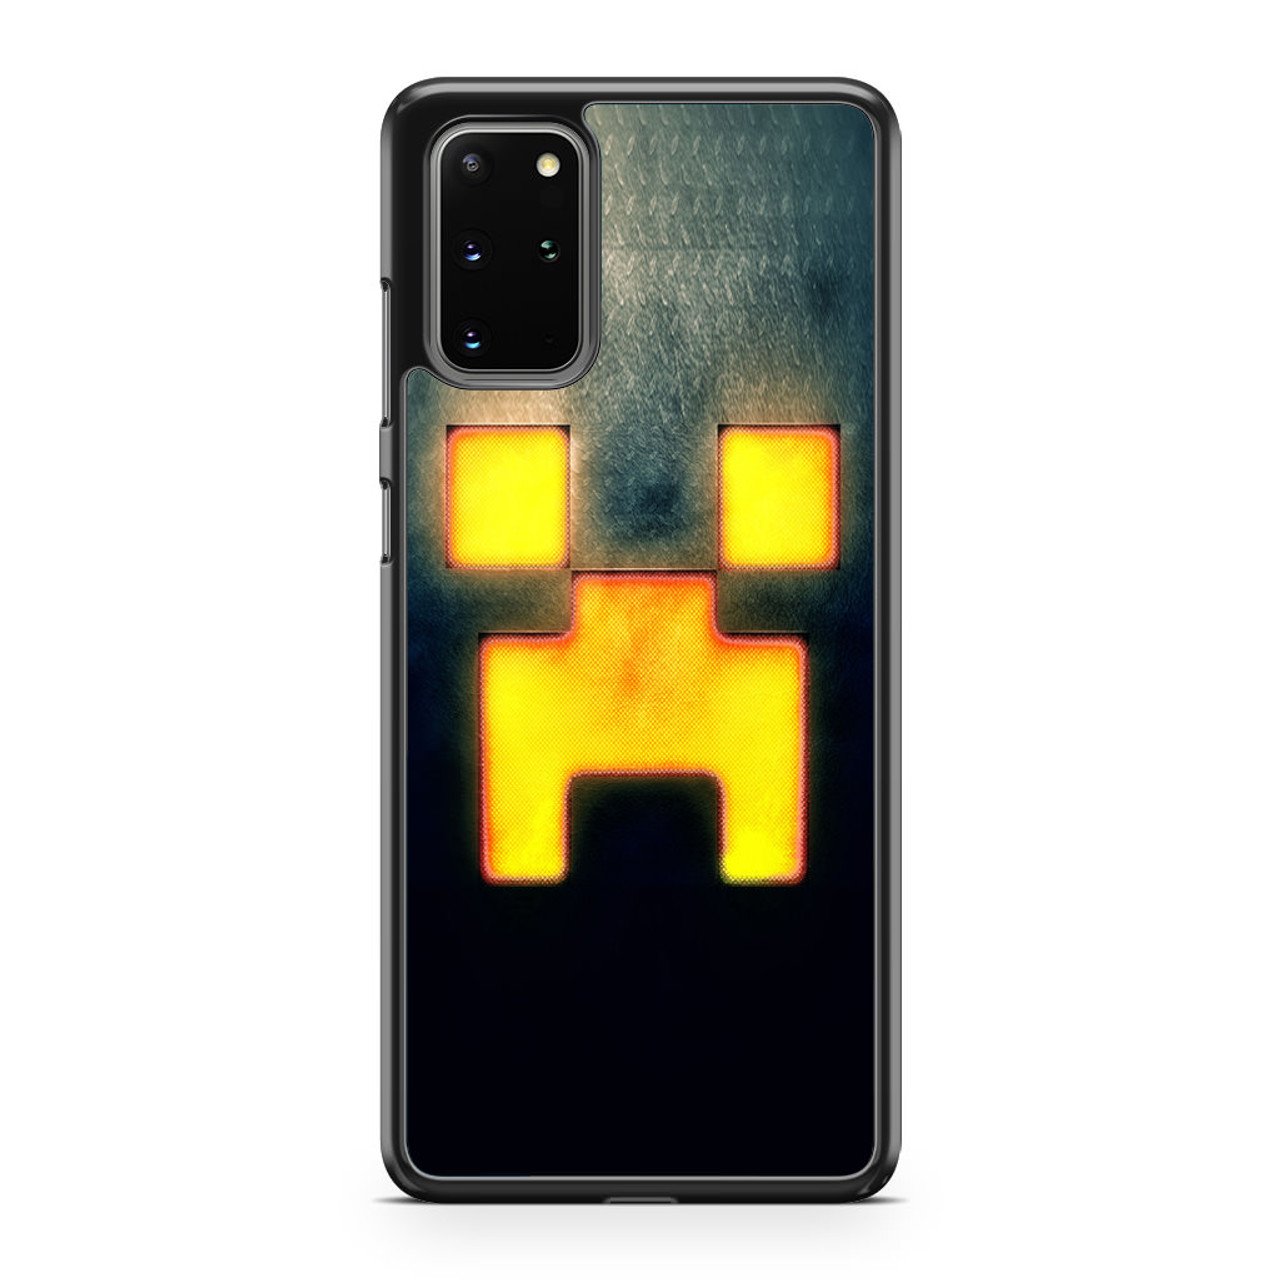 Minecraft Pocket Edition Phone Cases for Samsung Galaxy for Sale